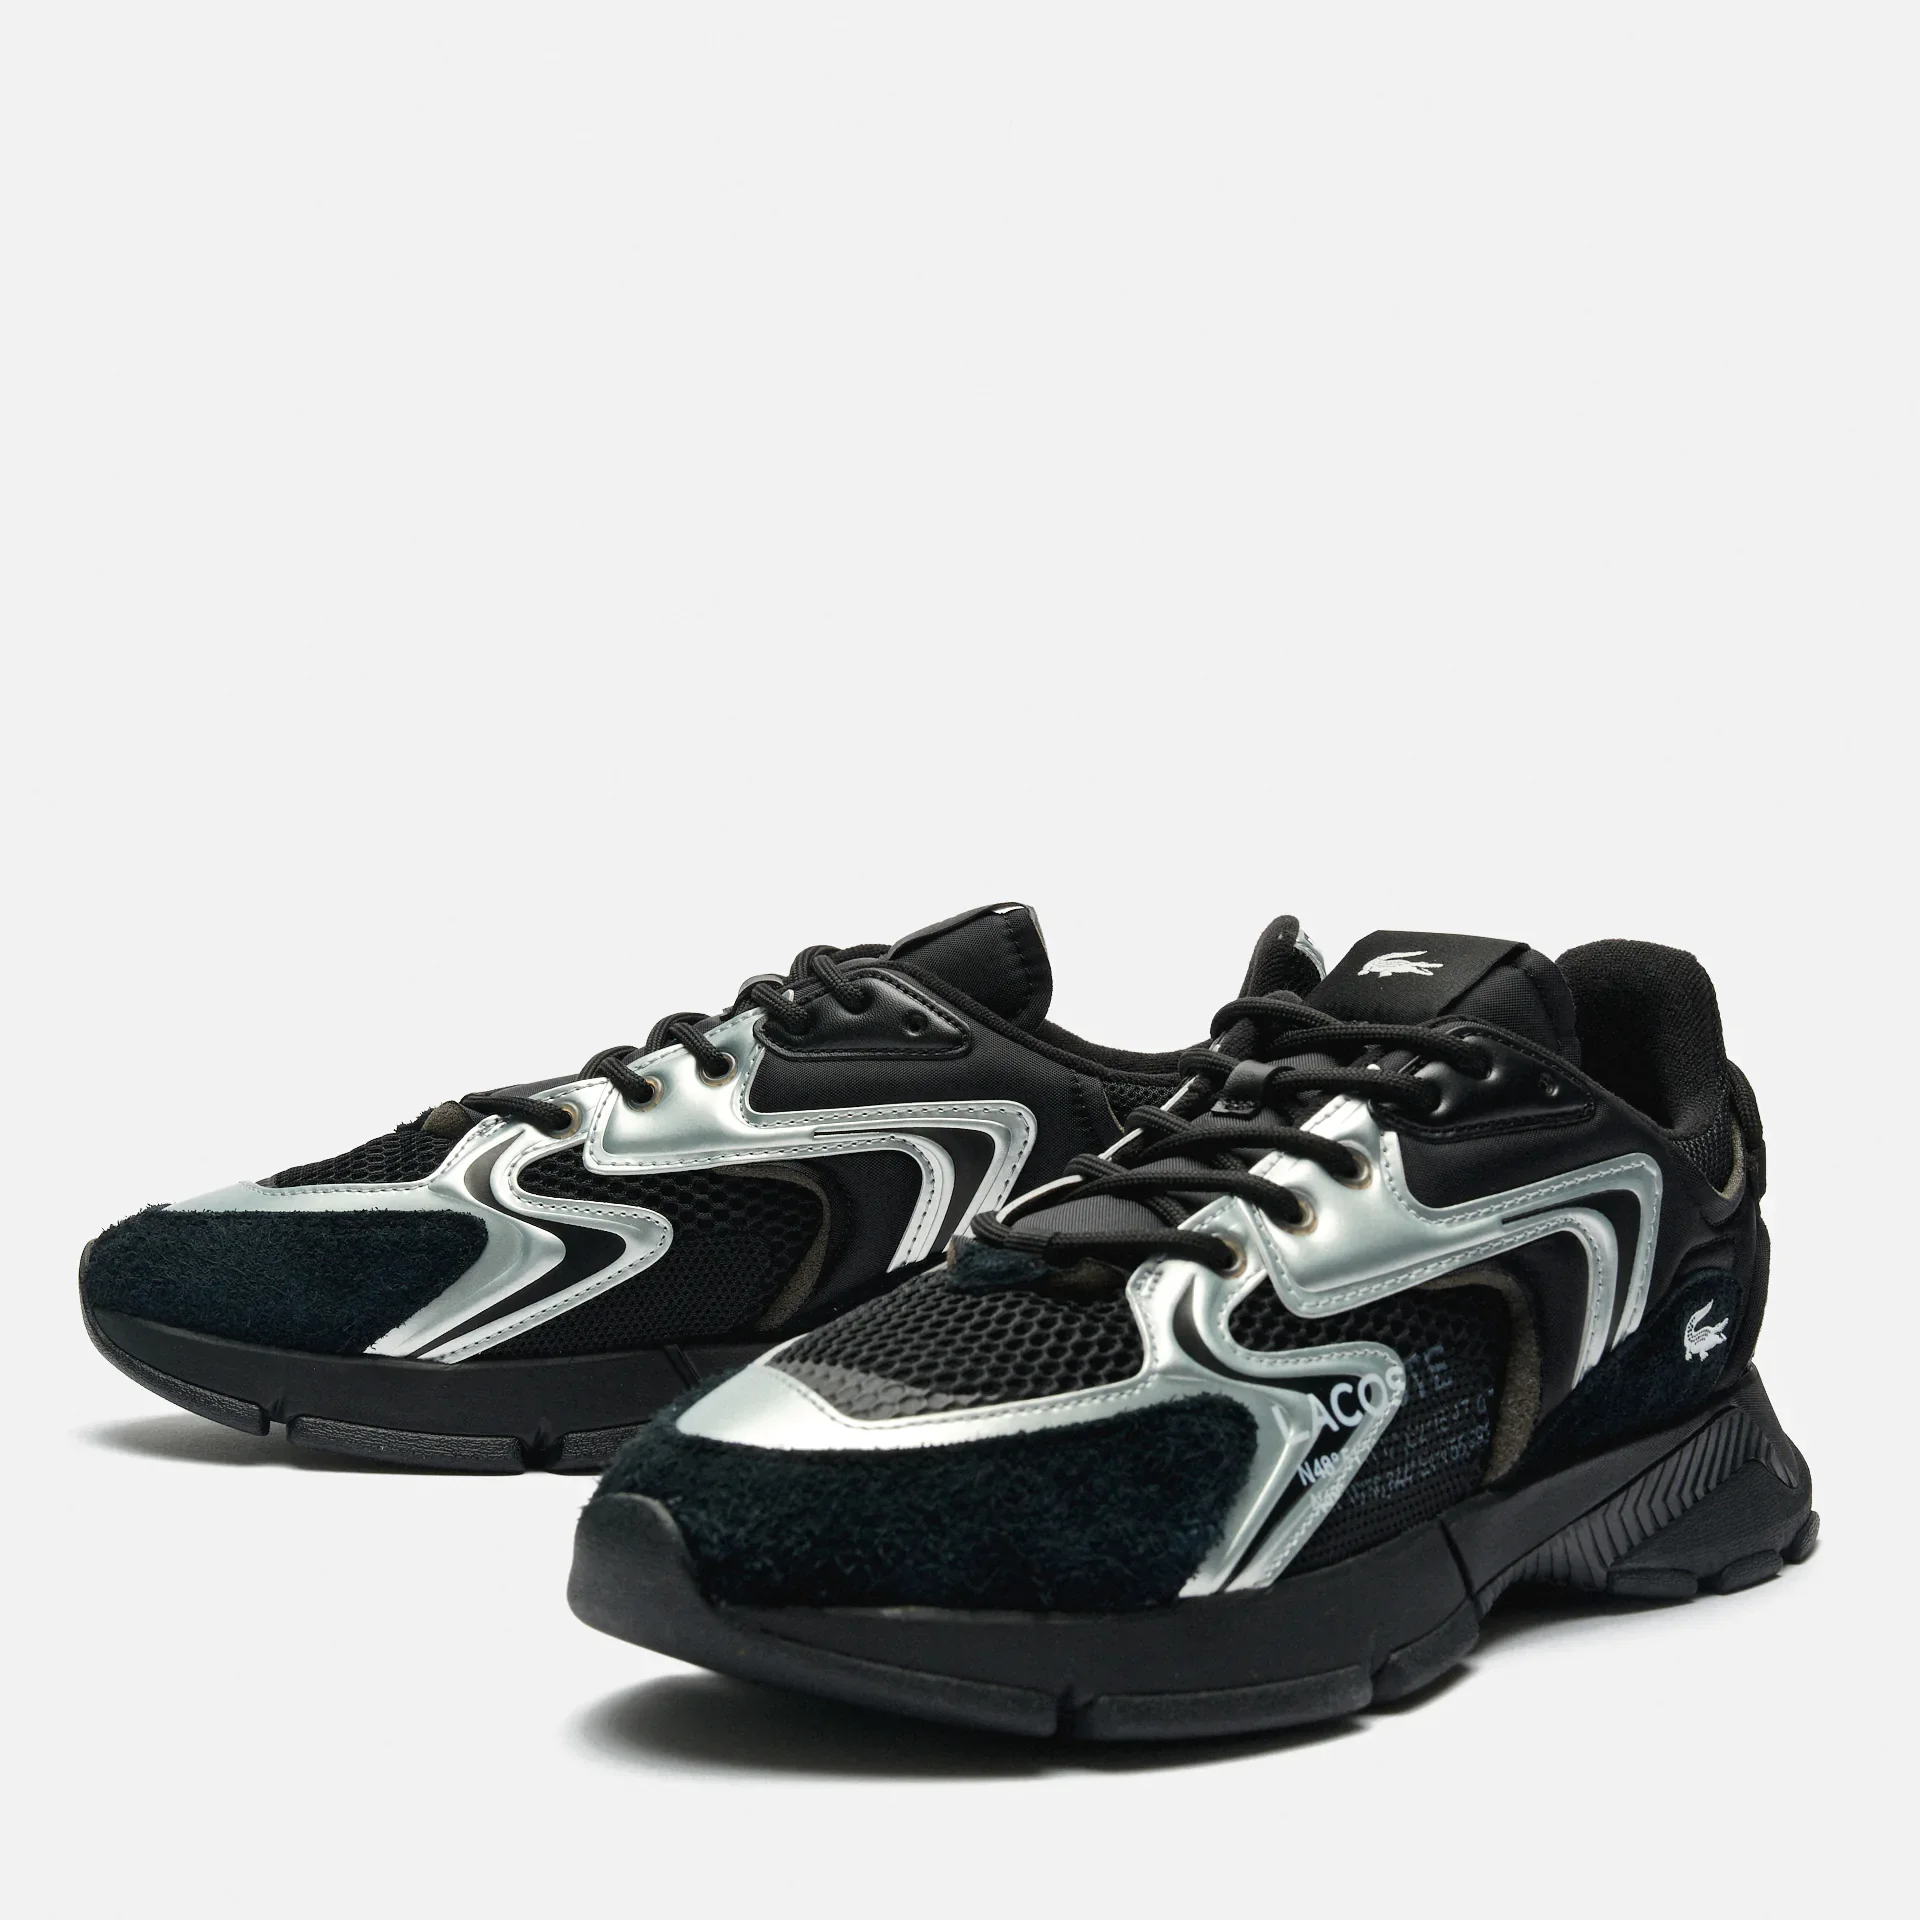 Lacoste L003 Neo Contrasted Textile Sneaker Black/White